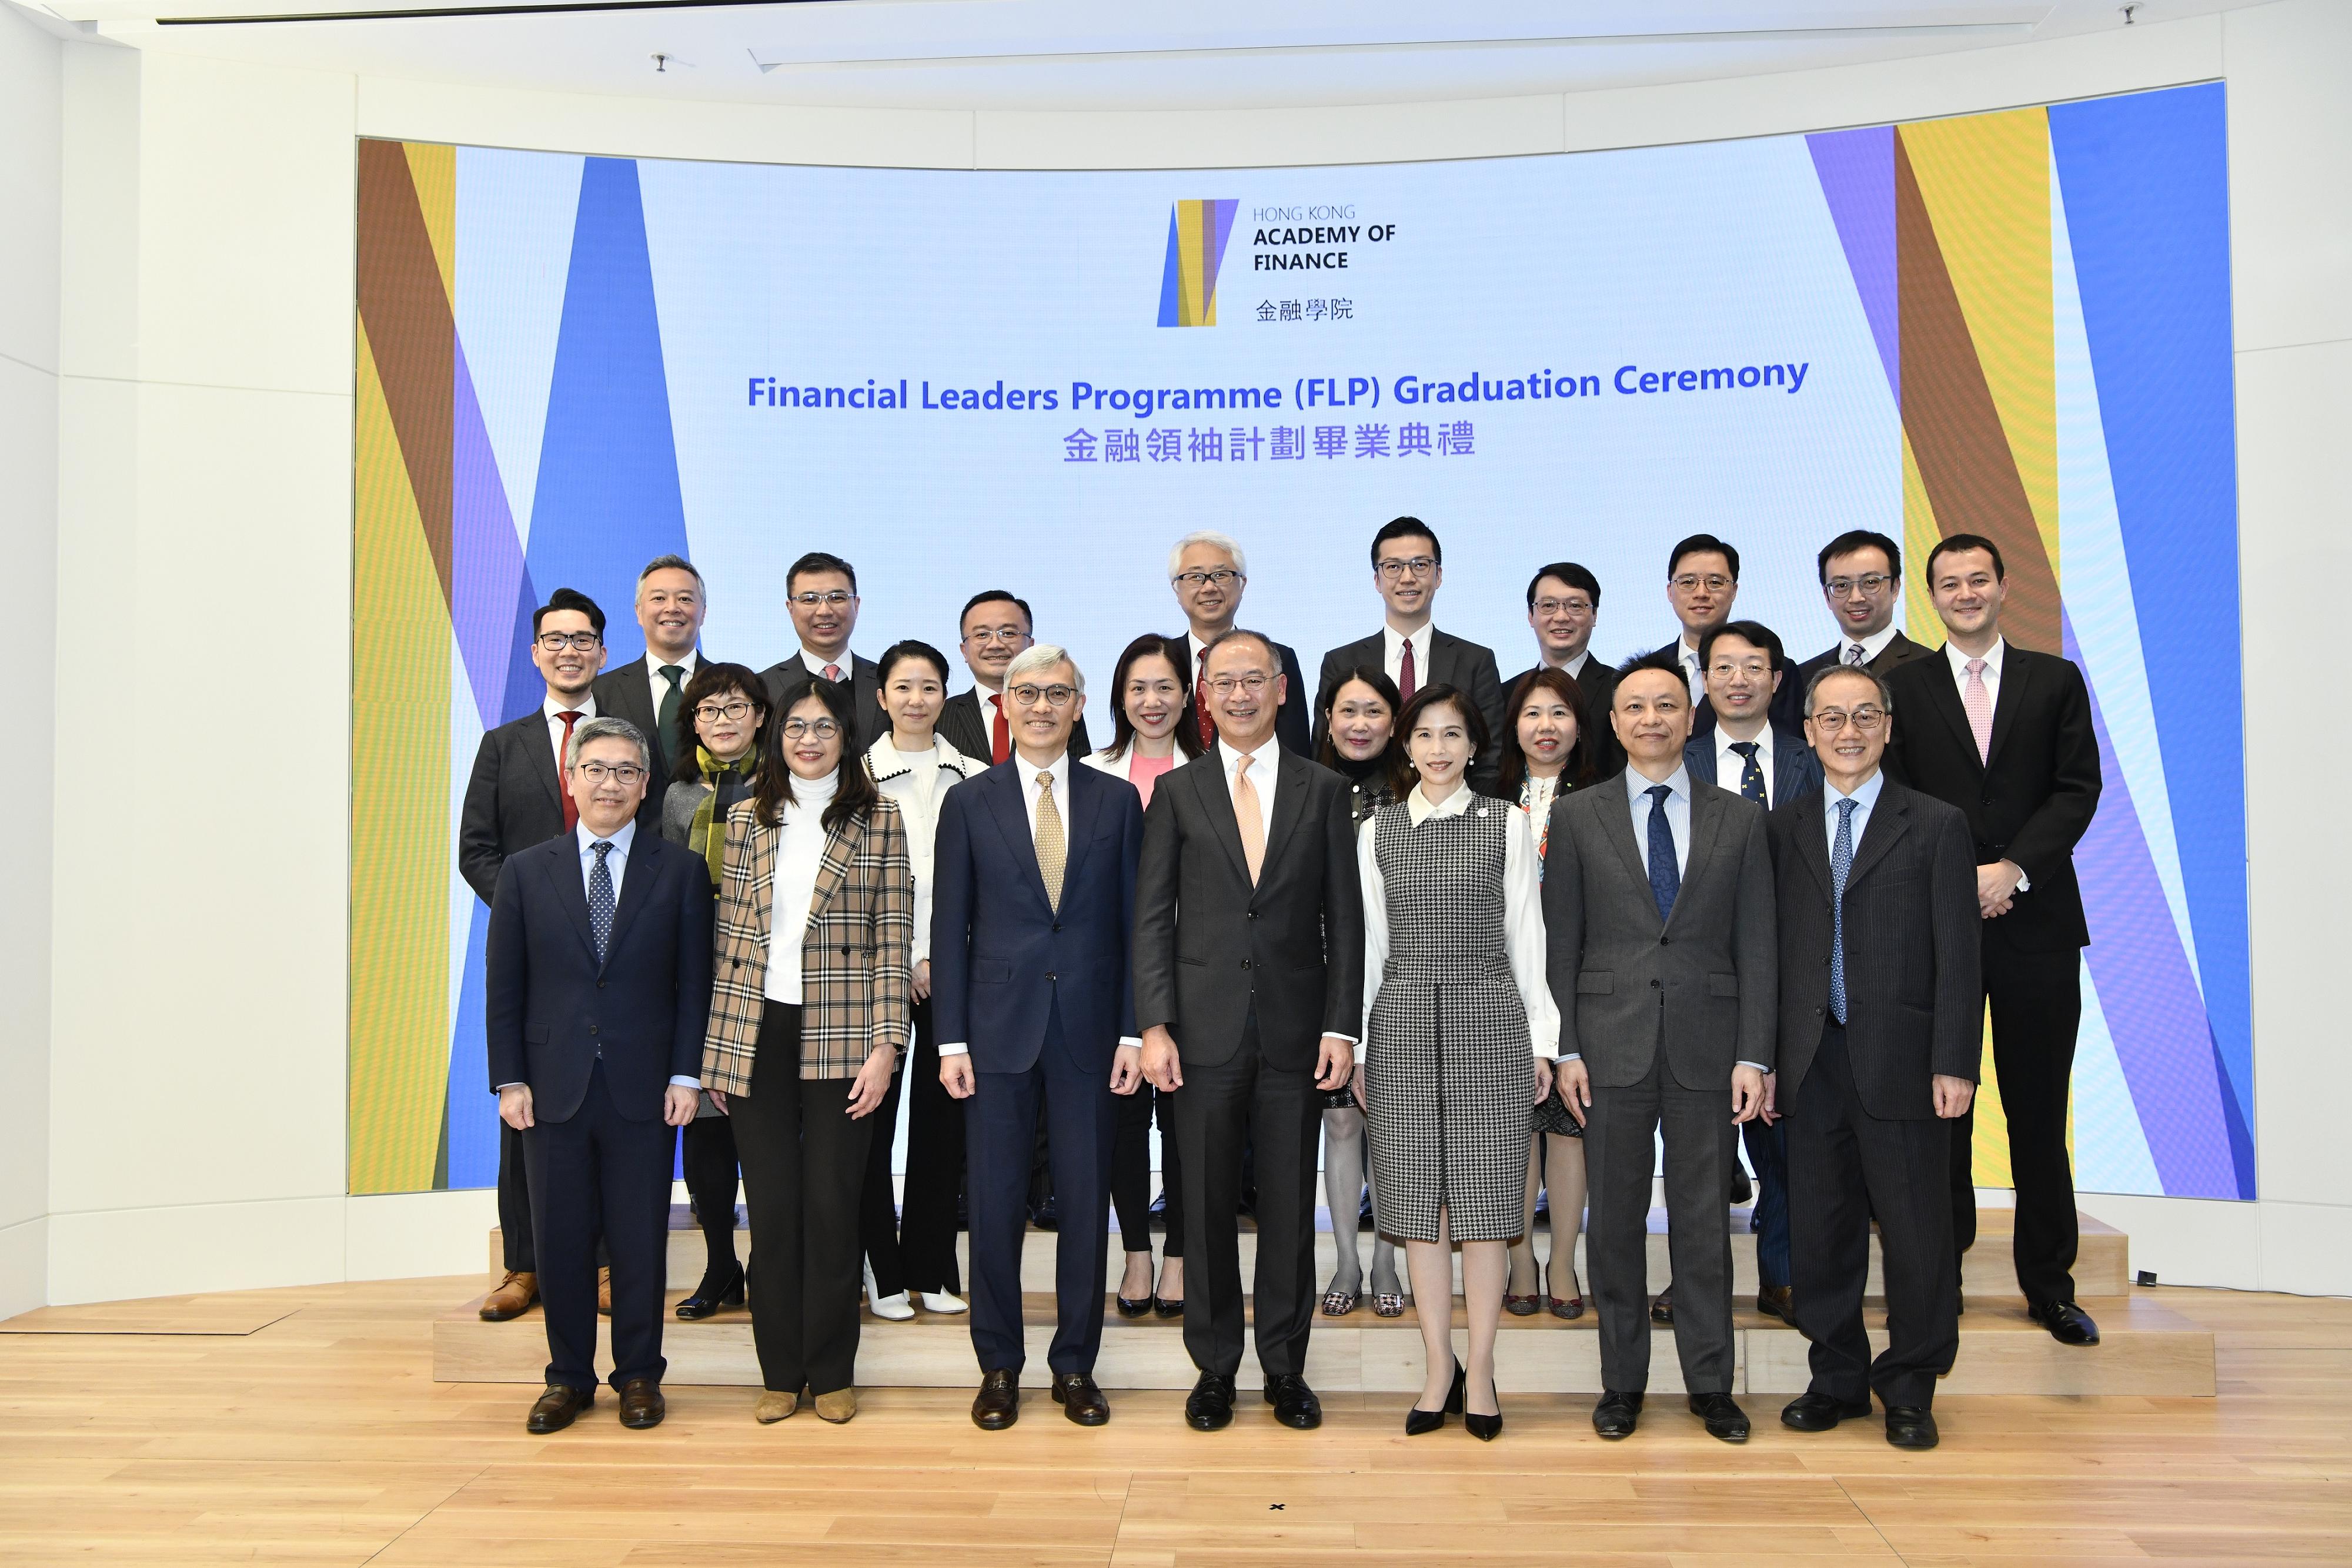 The Hong Kong Academy of Finance (AoF) held its Fellowship Conferment cum Financial Leaders Programme (FLP) Graduation Ceremony today (December 14). Photo shows (front row, from left) members of the Board of Directors of the AoF Mr Arthur Yuen, Ms Julia Leung, Mr Stephen Yiu, Mr Eddie Yue, Mrs Ayesha Macpherson Lau, Mr Darryl Chan, and the Chief Executive Officer of the AoF, Mr Kwok Kwok-chuen in a group photo with FLP Graduates (second and third rows).